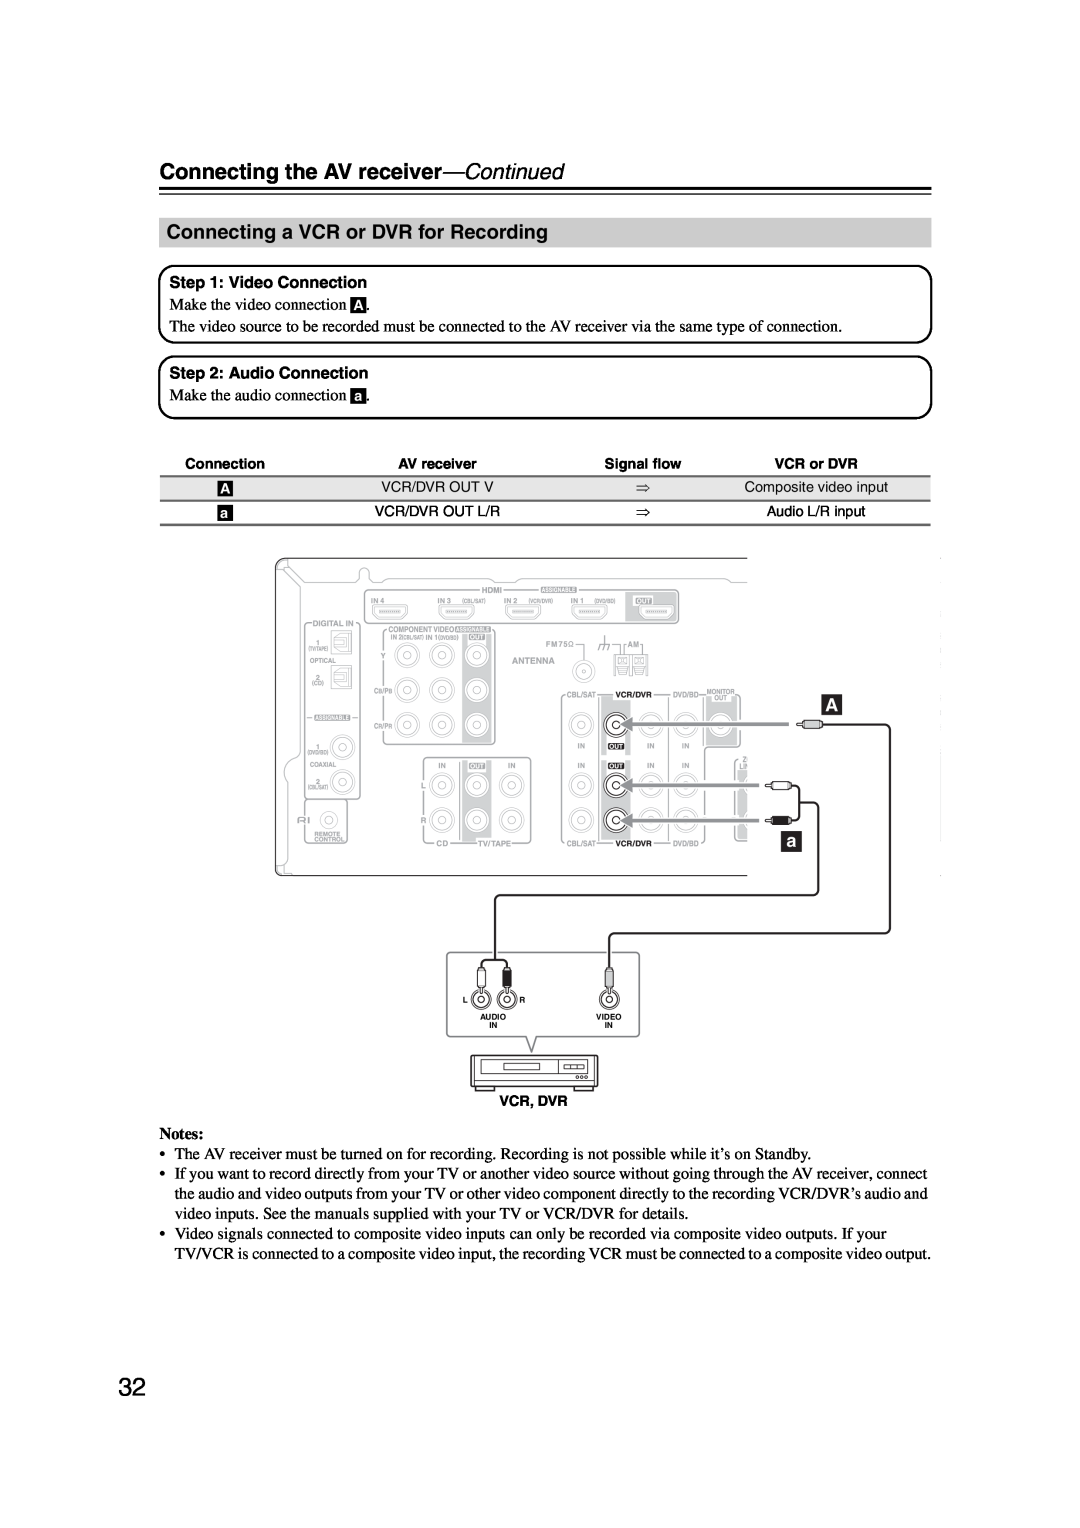 Onkyo 29344937, HT-S6200 instruction manual Connecting a VCR or DVR for Recording, Connecting the AV receiver—Continued 